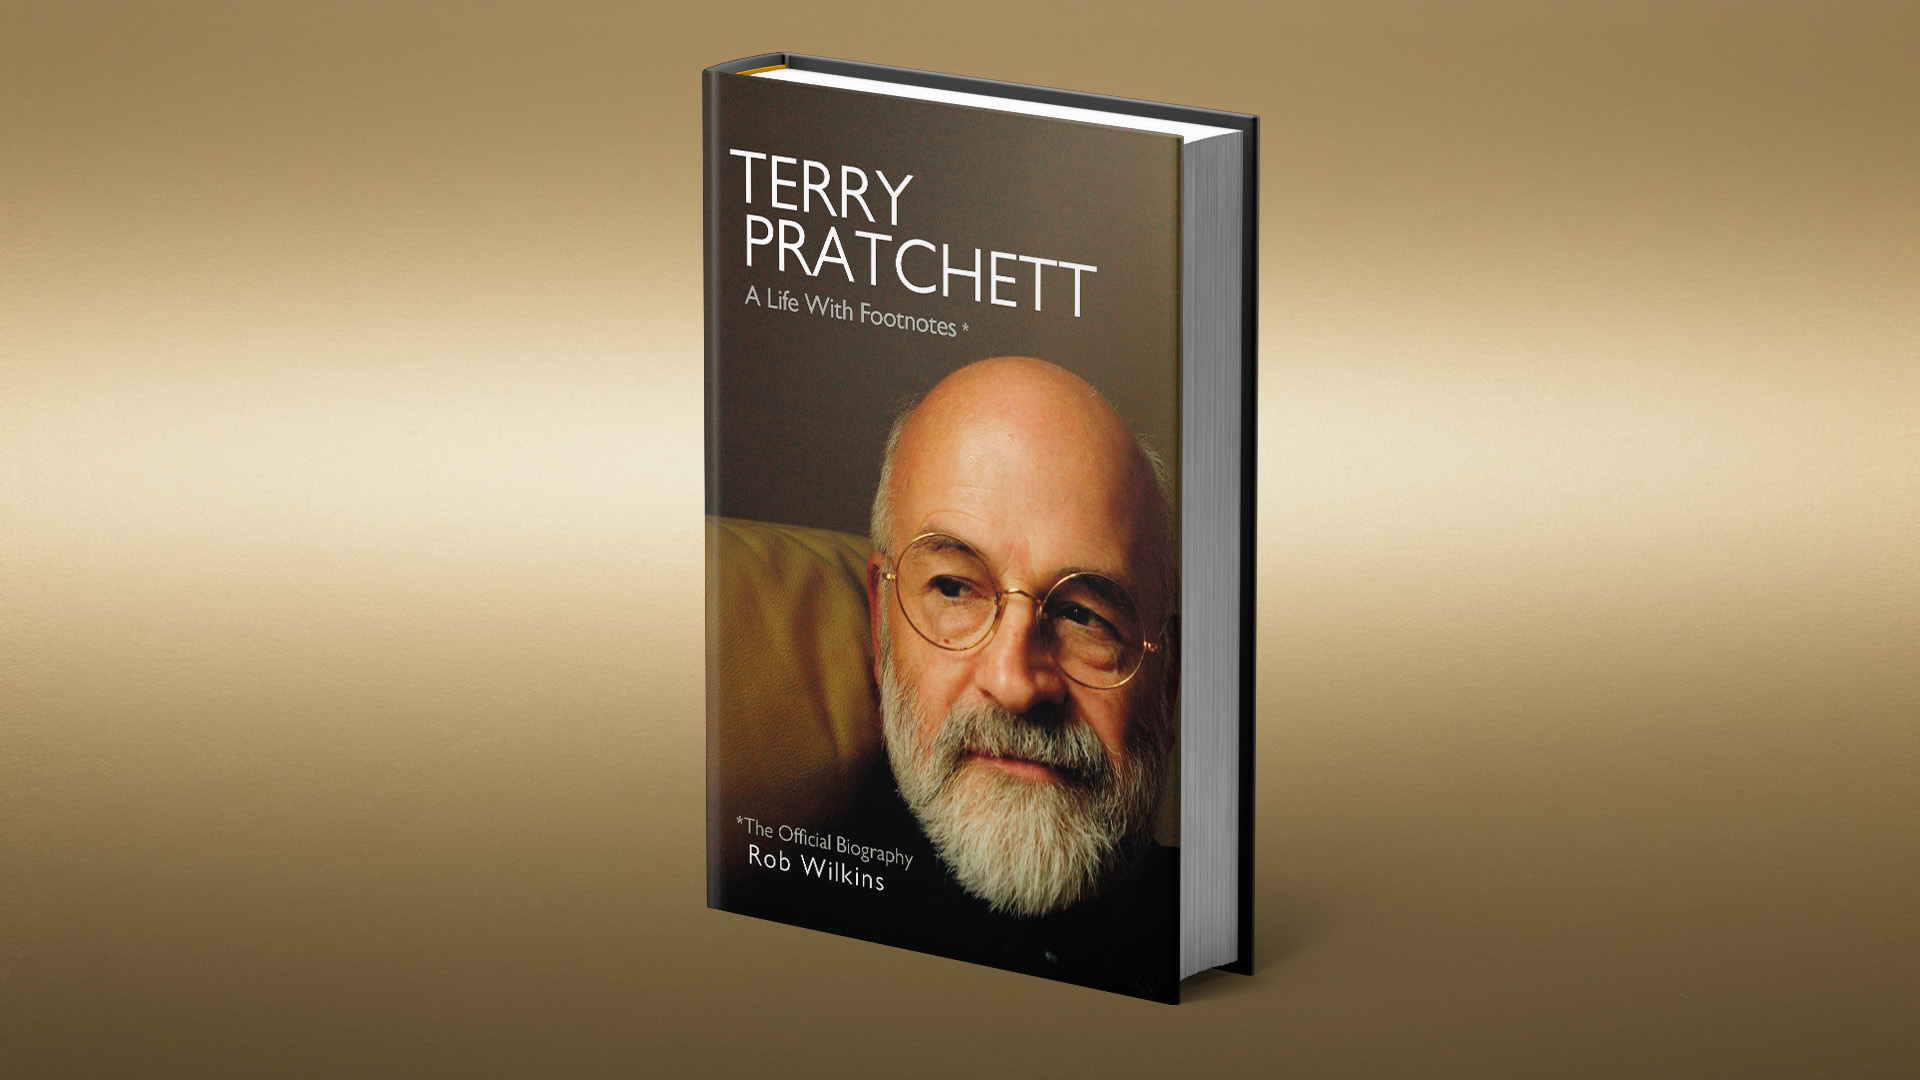 A LIFE WITH FOOTNOTES — THE OFFICIAL BIOGRAPHY OF TERRY PRATCHETT